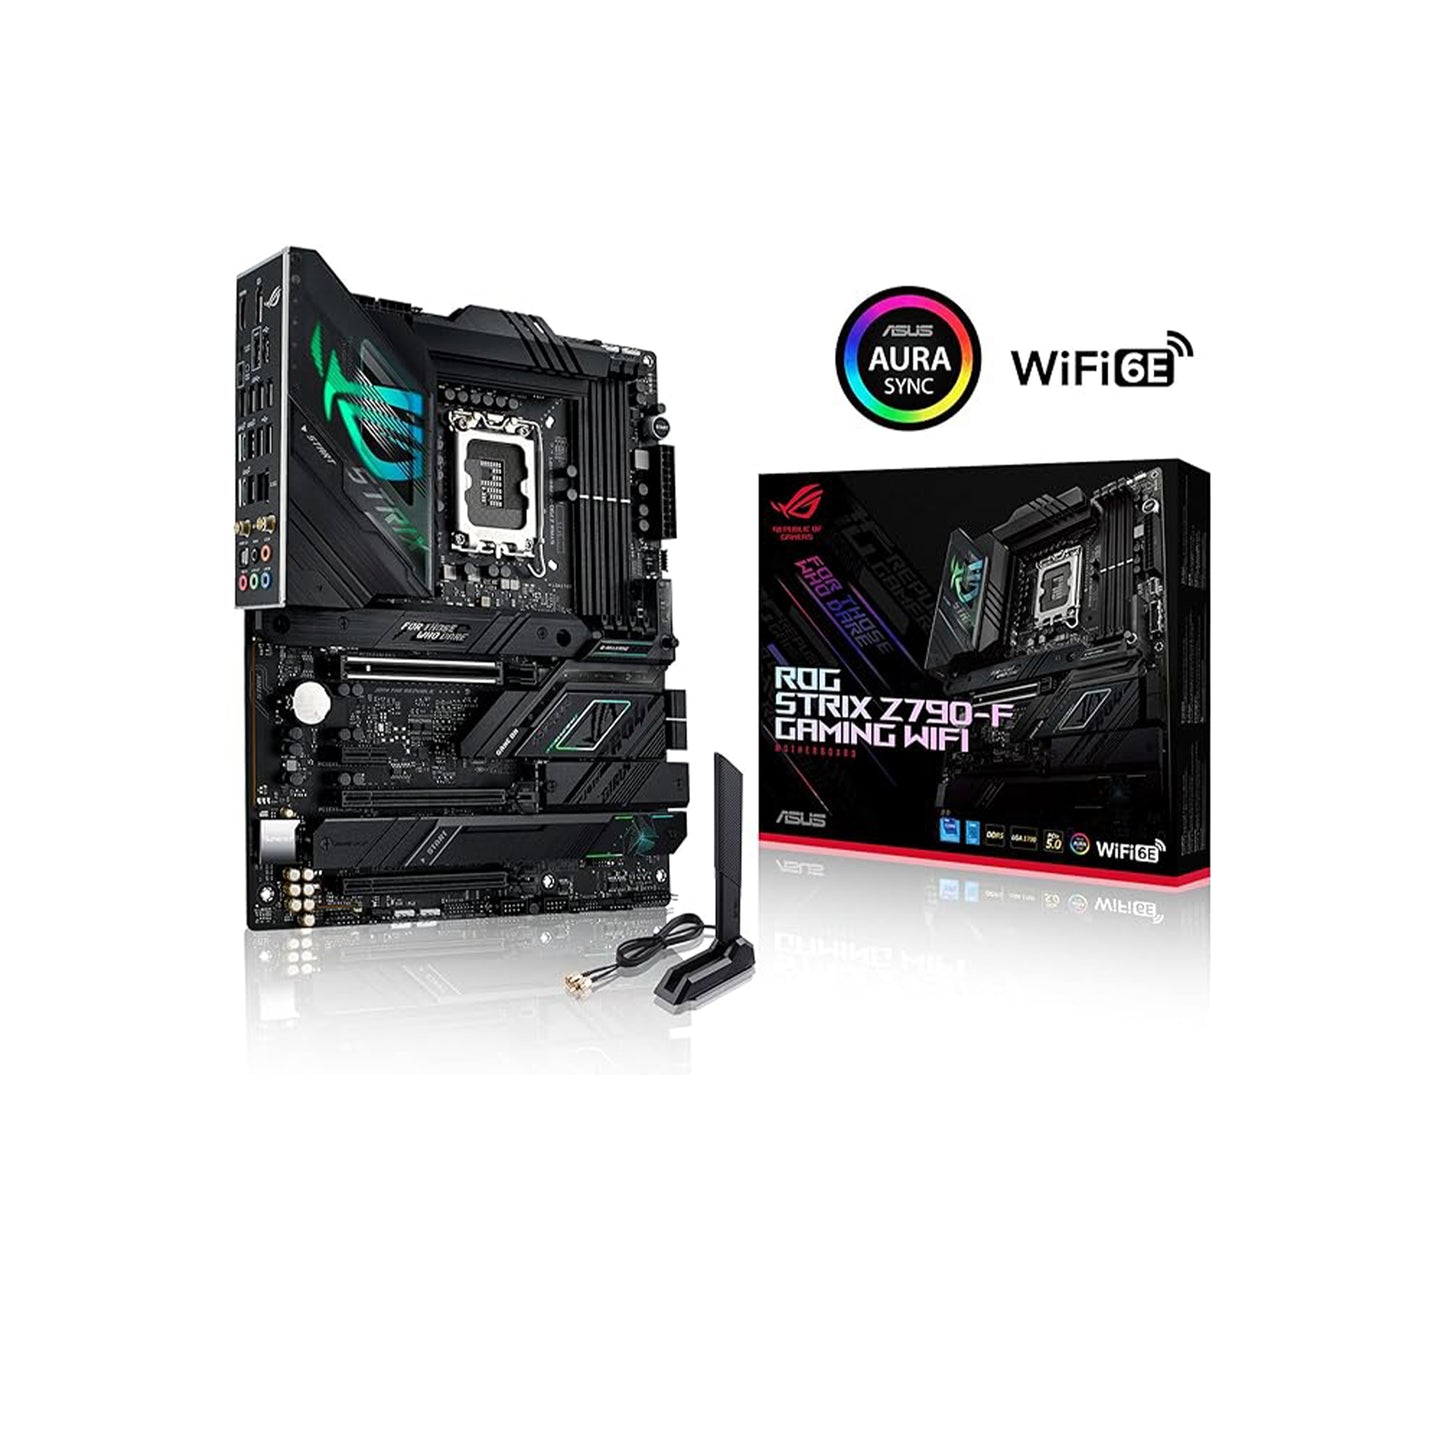 Micro Center Intel Core i9-12900K Desktop Processor 16 (8P+8E) Cores up to 5.2 GHz Unlocked with ASUS ROG Strix Z790-F Gaming WiFi 6E DDR5 LGA 1700 ATX Gaming Motherboard